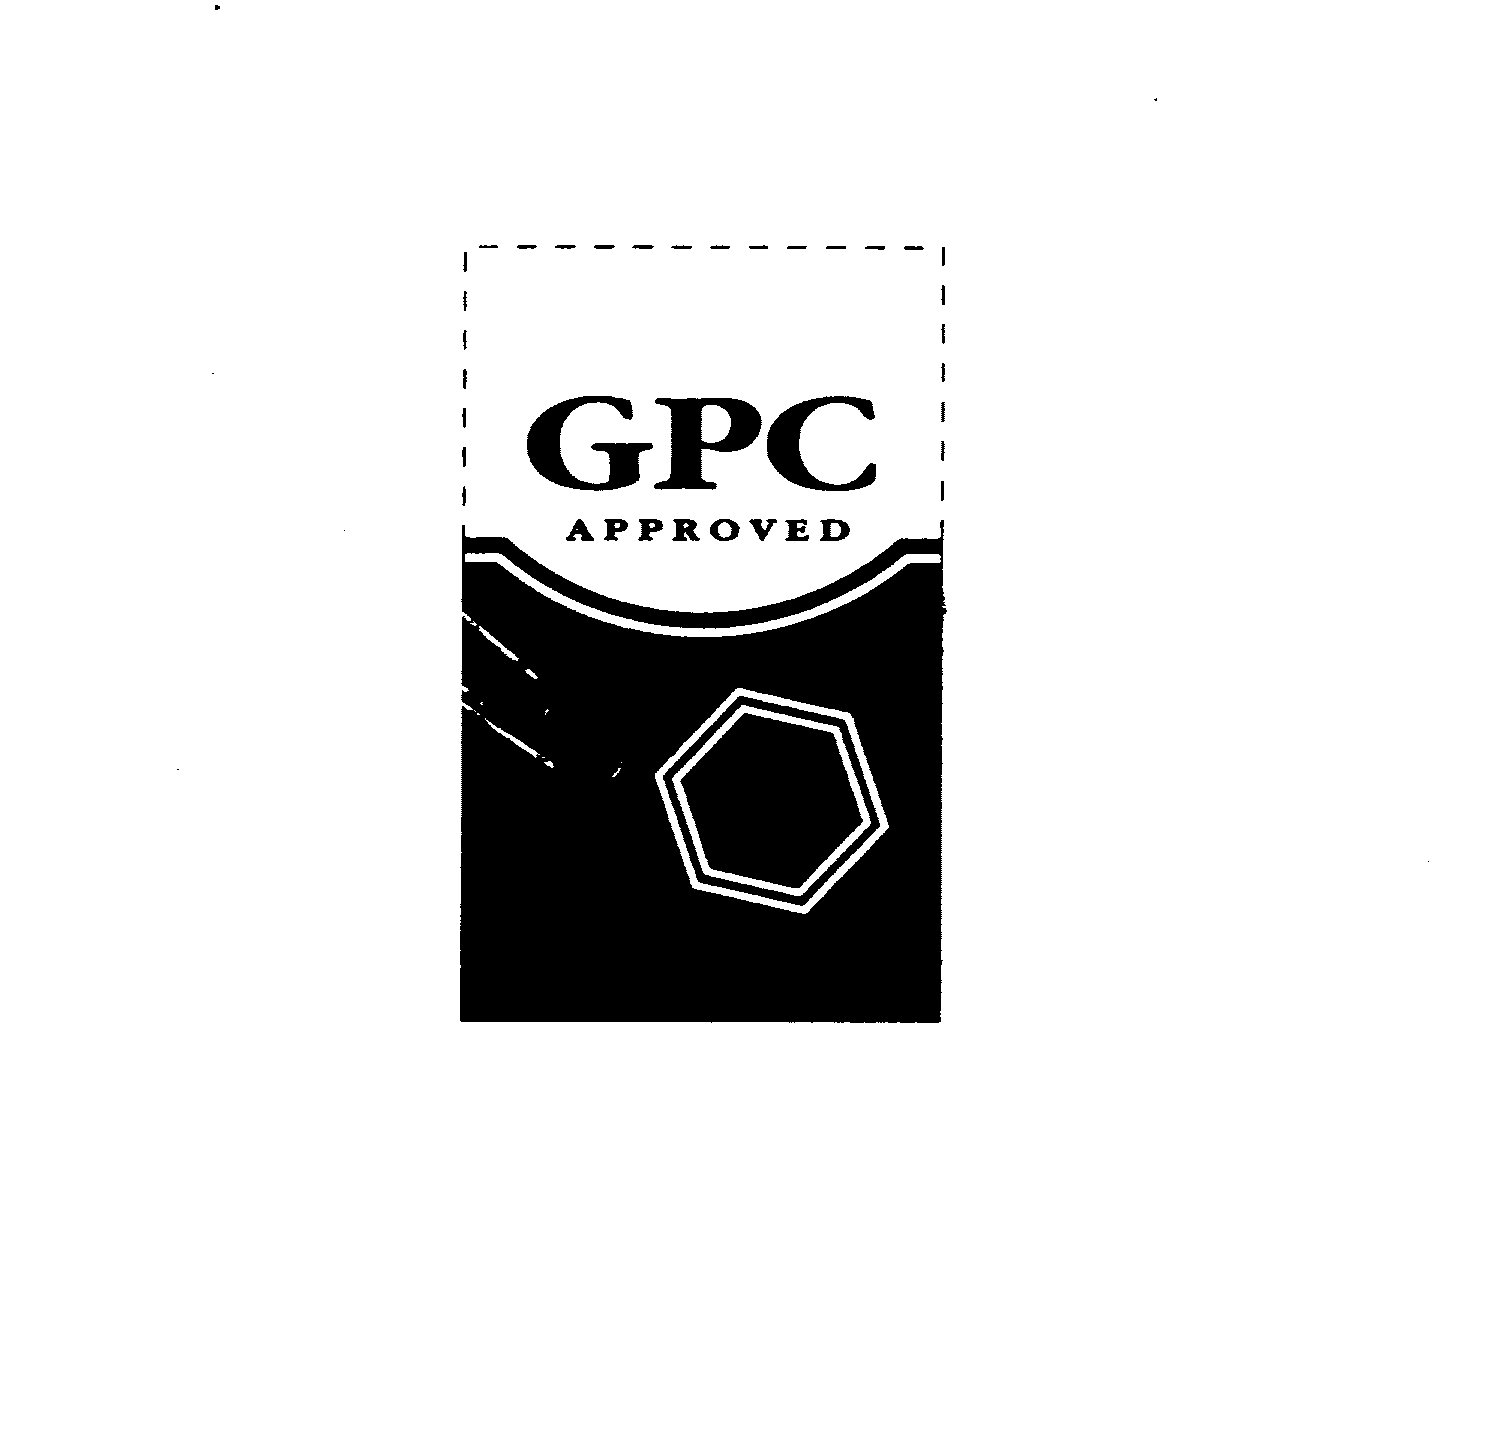  GPC APPROVED